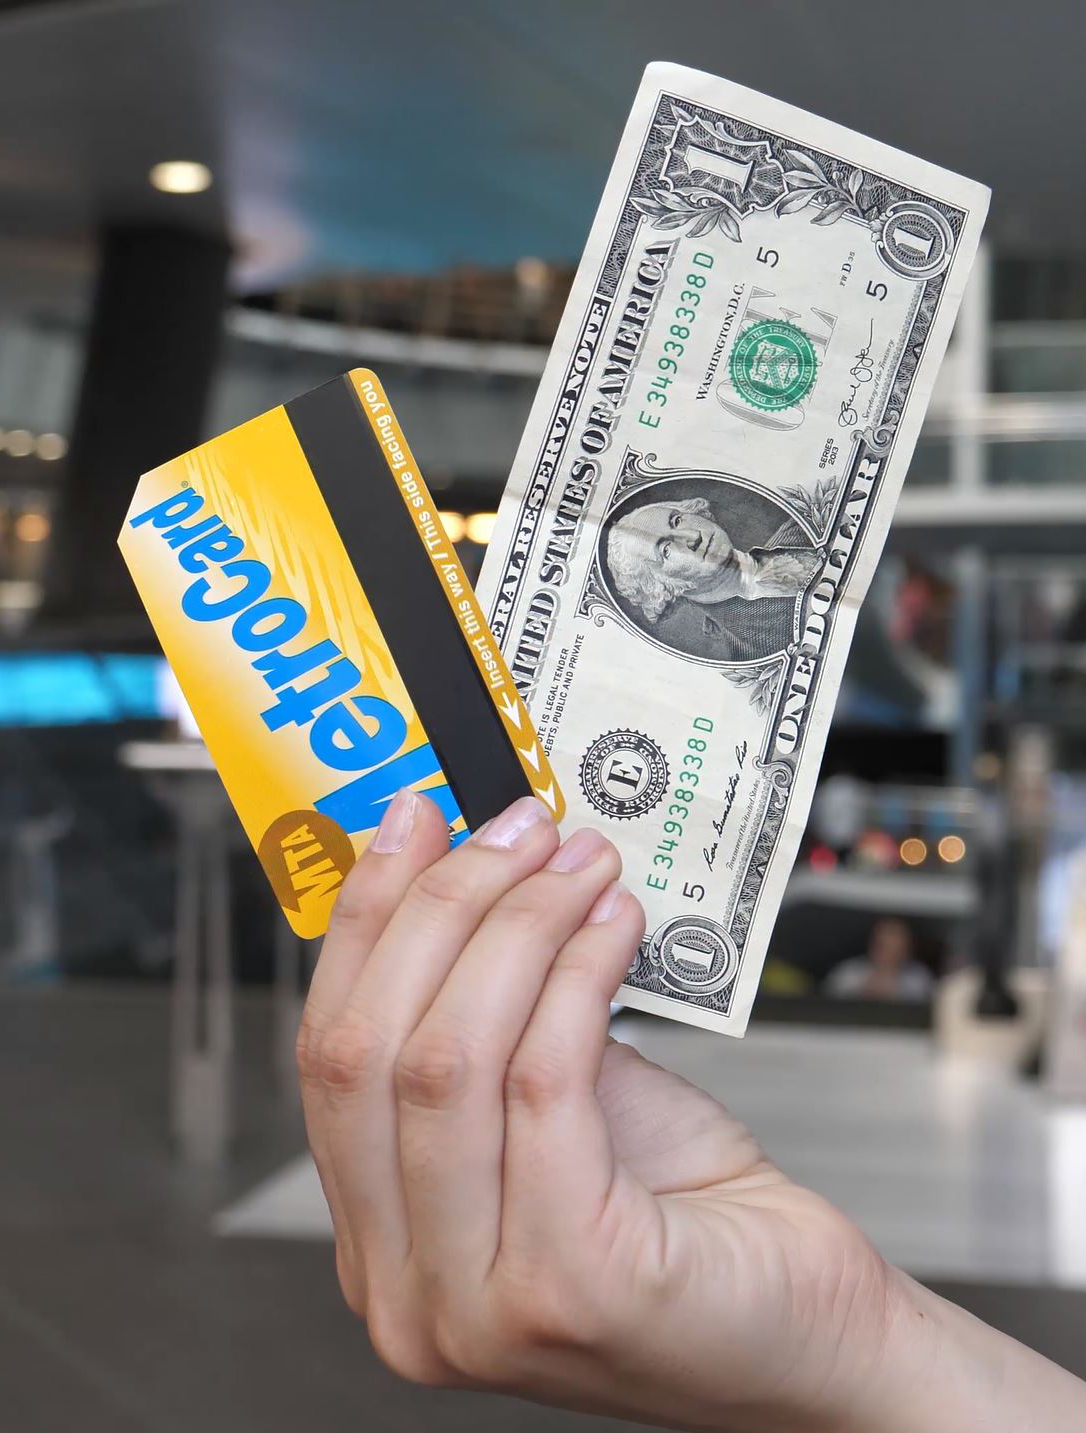 25 Things You Need to Know About the NYC Subway MetroCard